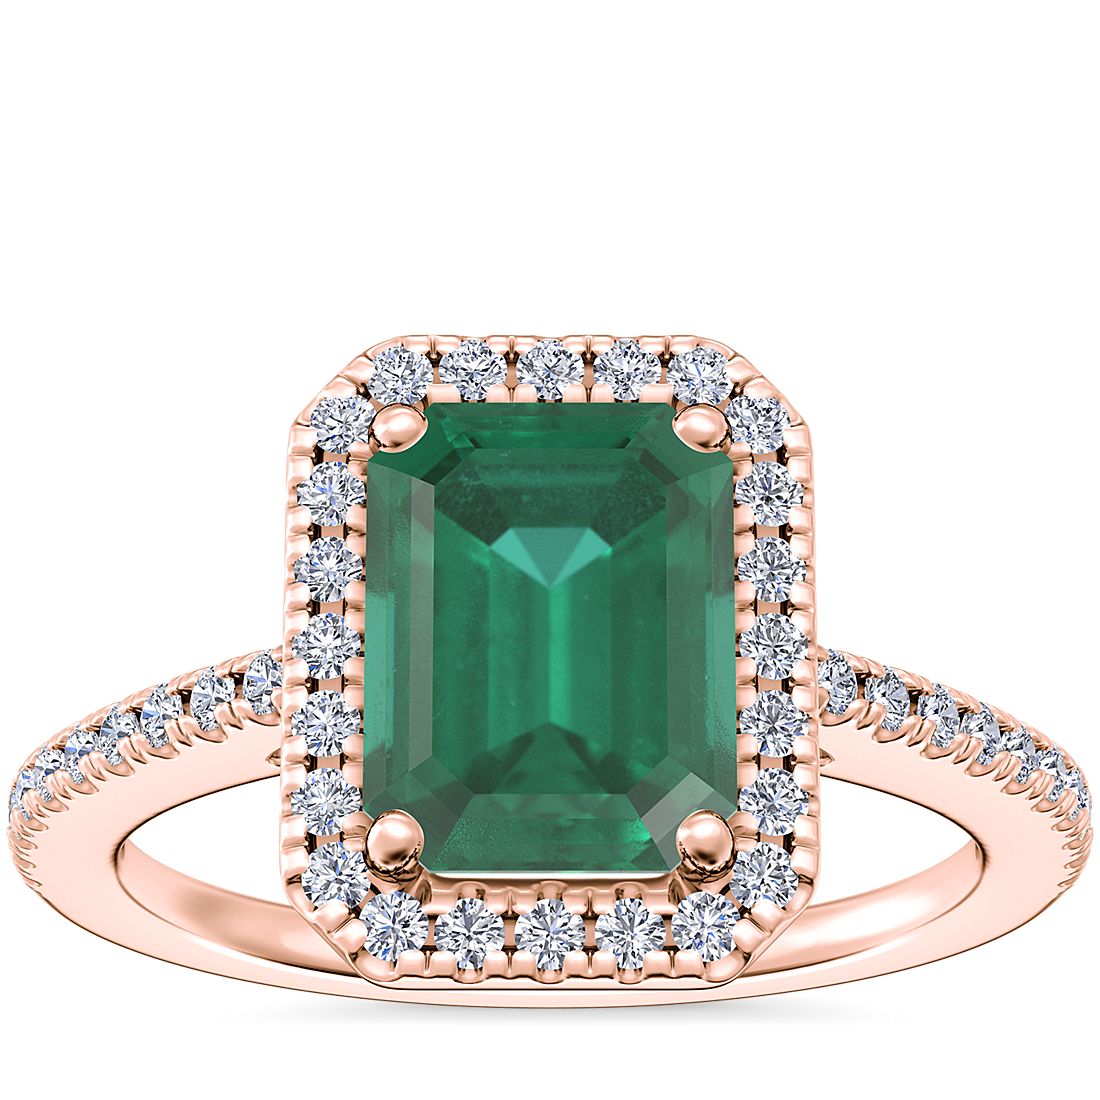 Classic Halo Diamond Engagement Ring with Emerald-Cut Emerald in 14k Rose Gold (8x6mm)